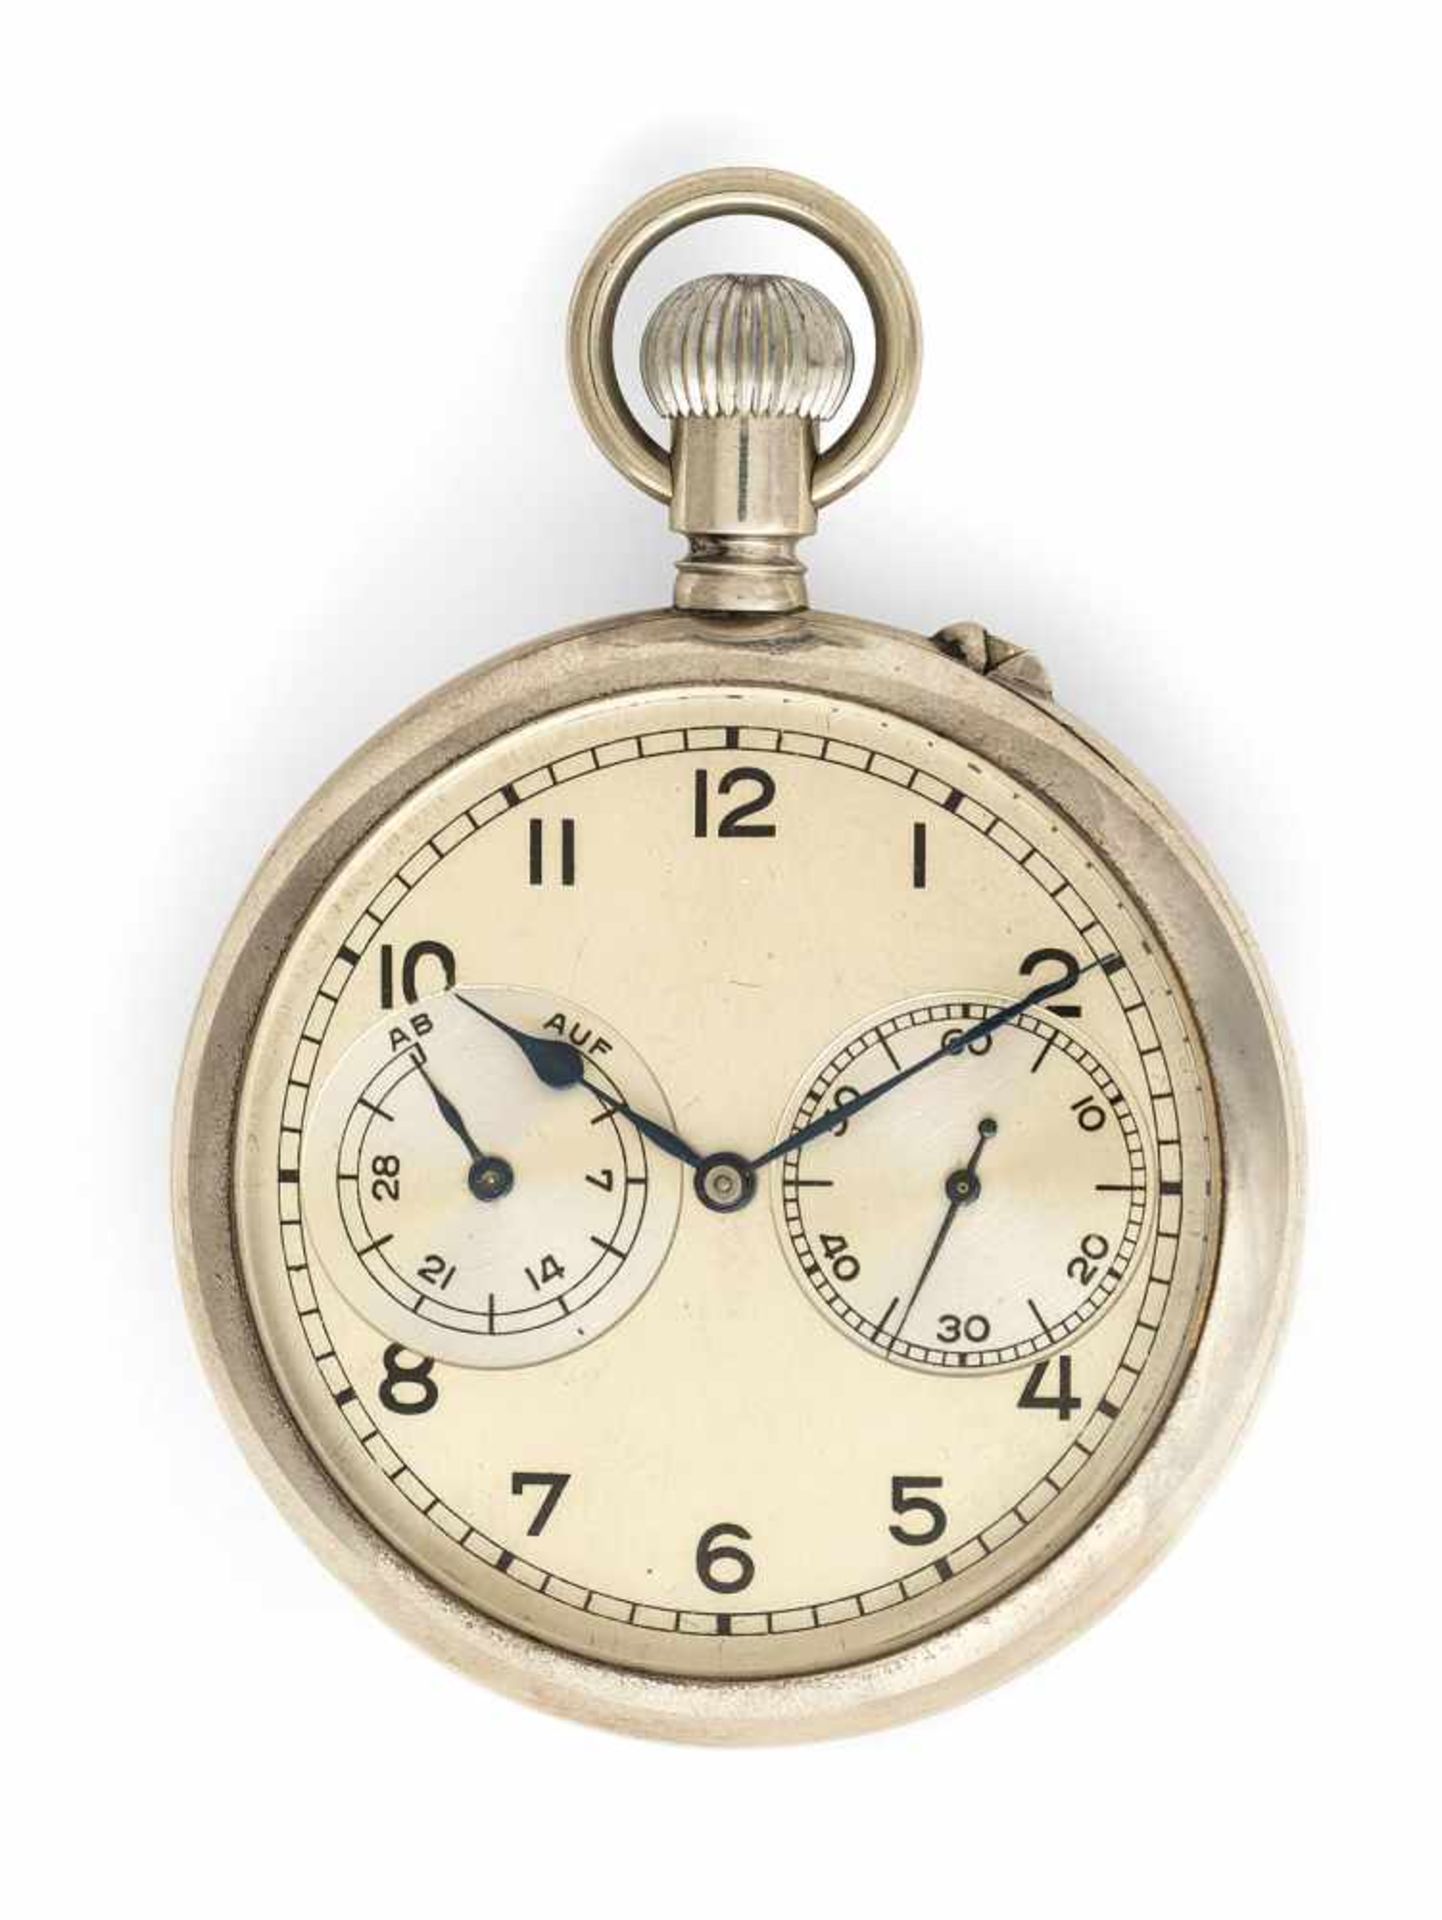 A silver deck watch, signed A. Lange & Söhne Glashütte i. Sachsen Nr. 204725. Silver dial with